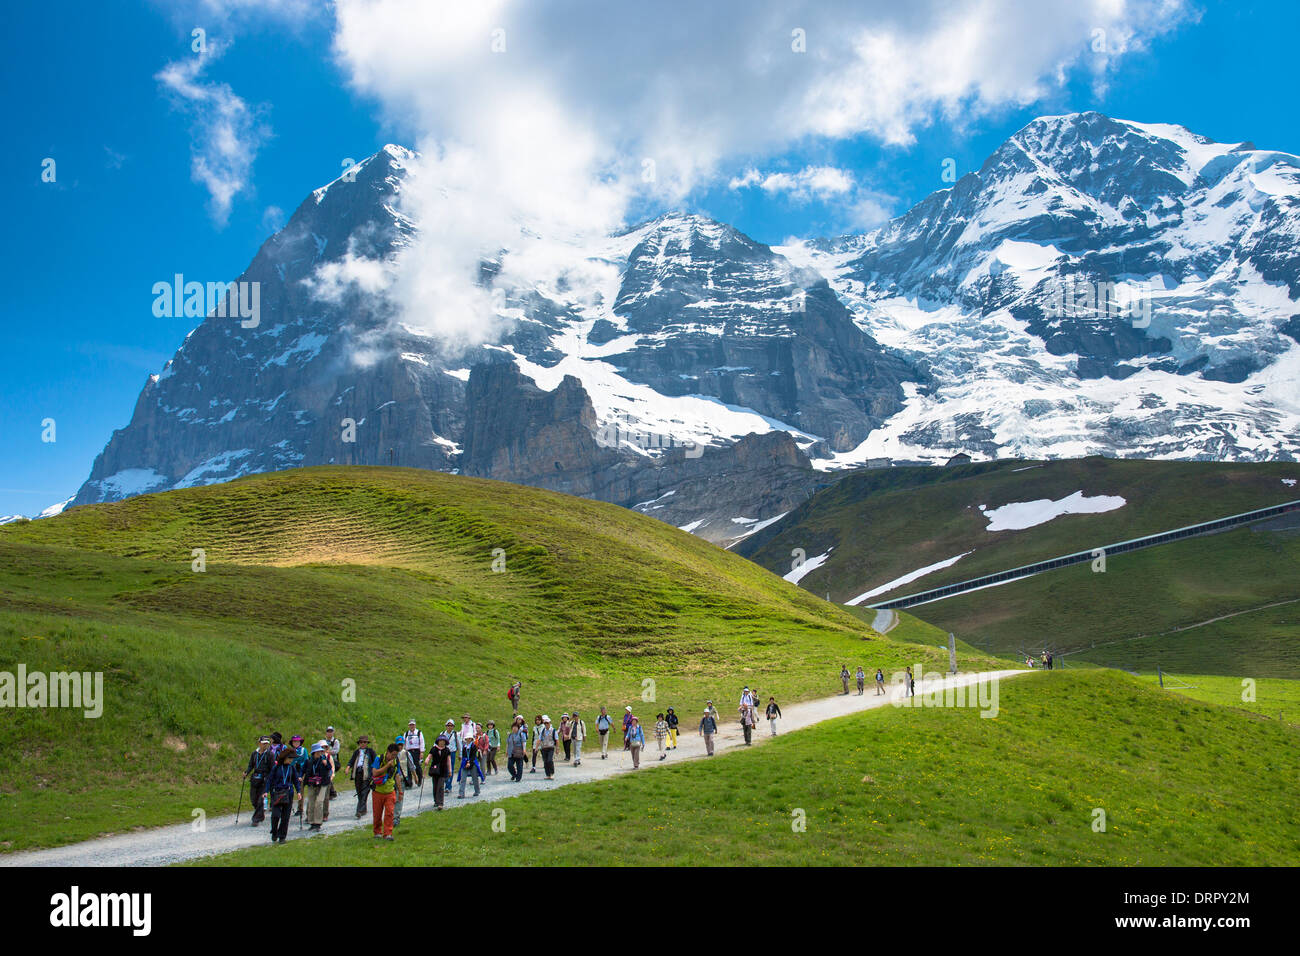 Japanese tourists on walking trail by the North Face of the Eiger mountain  in the Swiss Alps, Bernese Oberland, Switzerland Stock Photo - Alamy